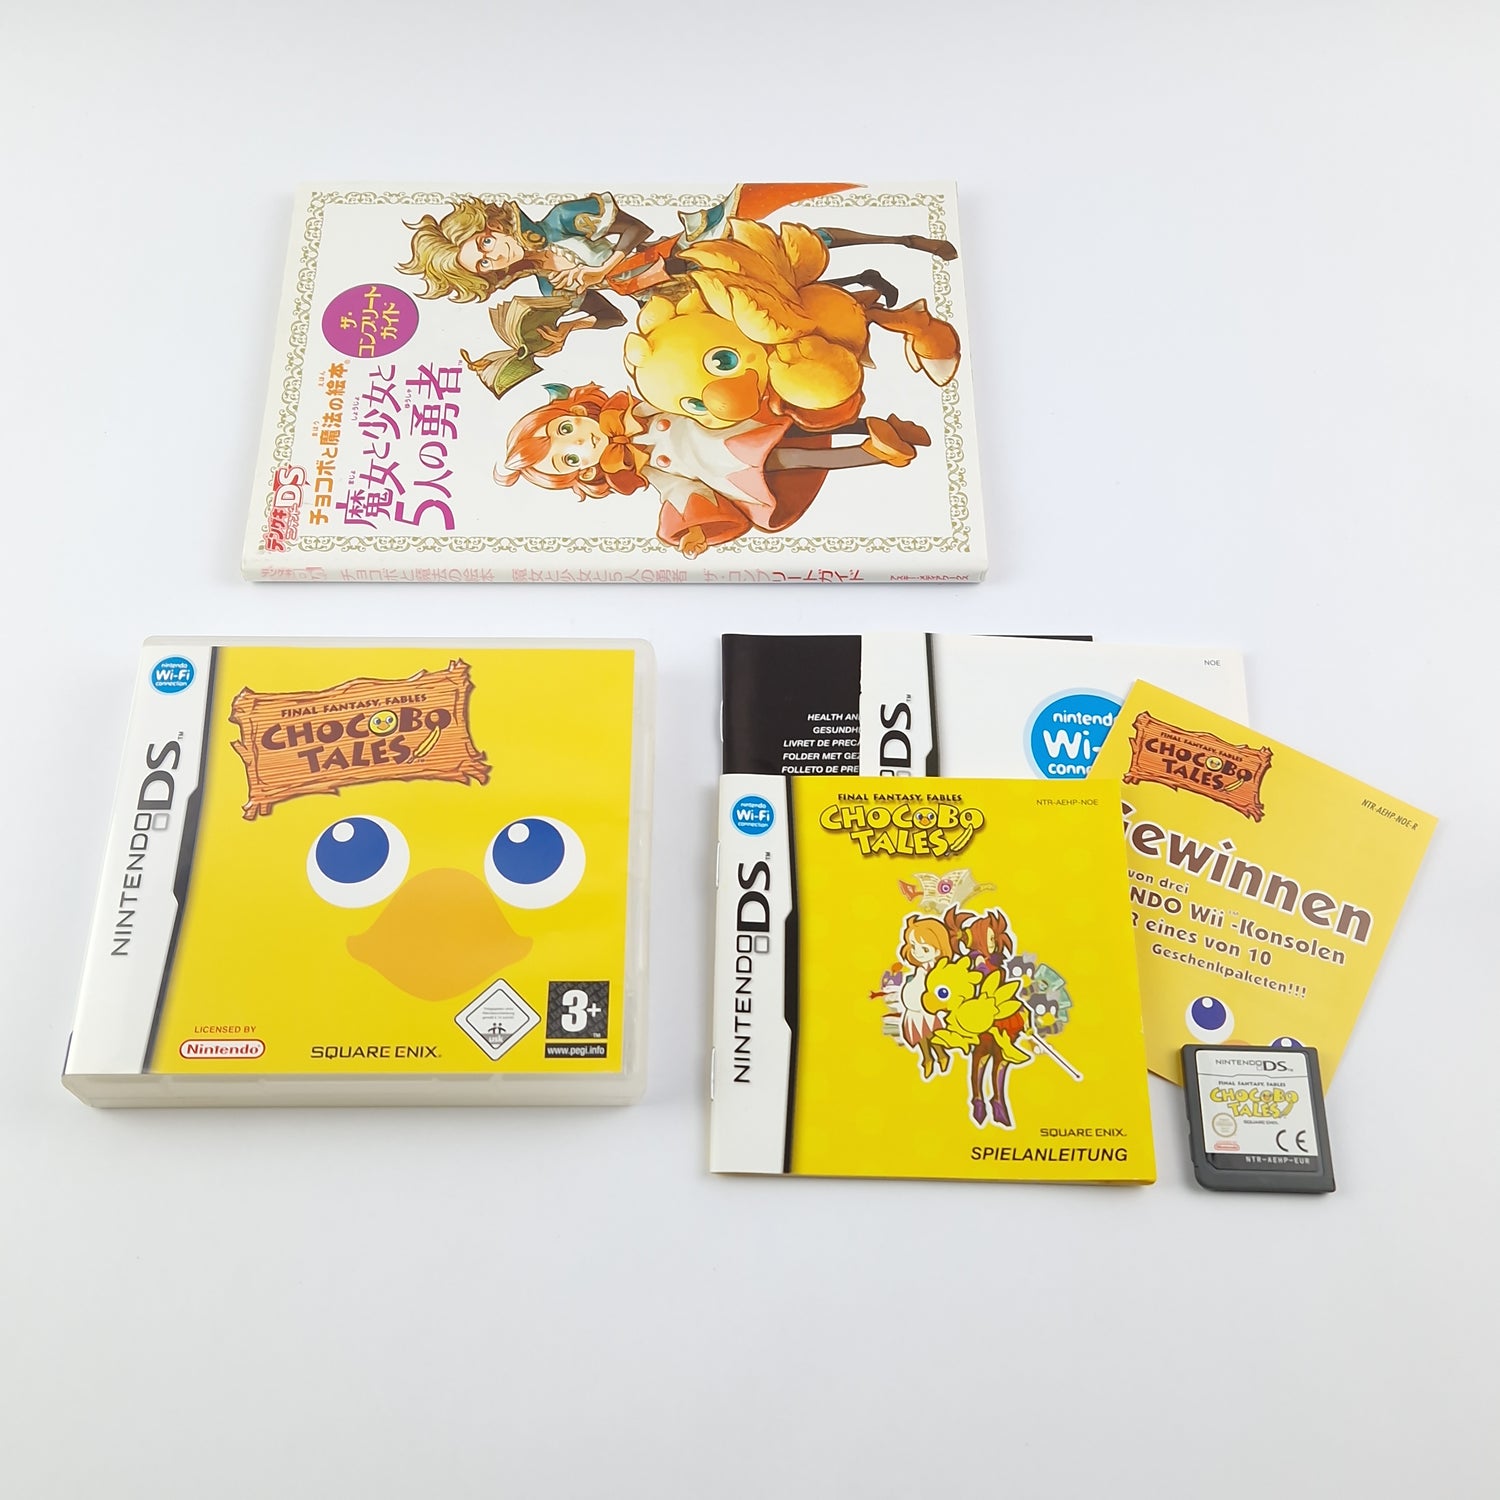 Nintendo DS Game : Final Fantasy Fables Chocobo Tales + JAPAN Guide